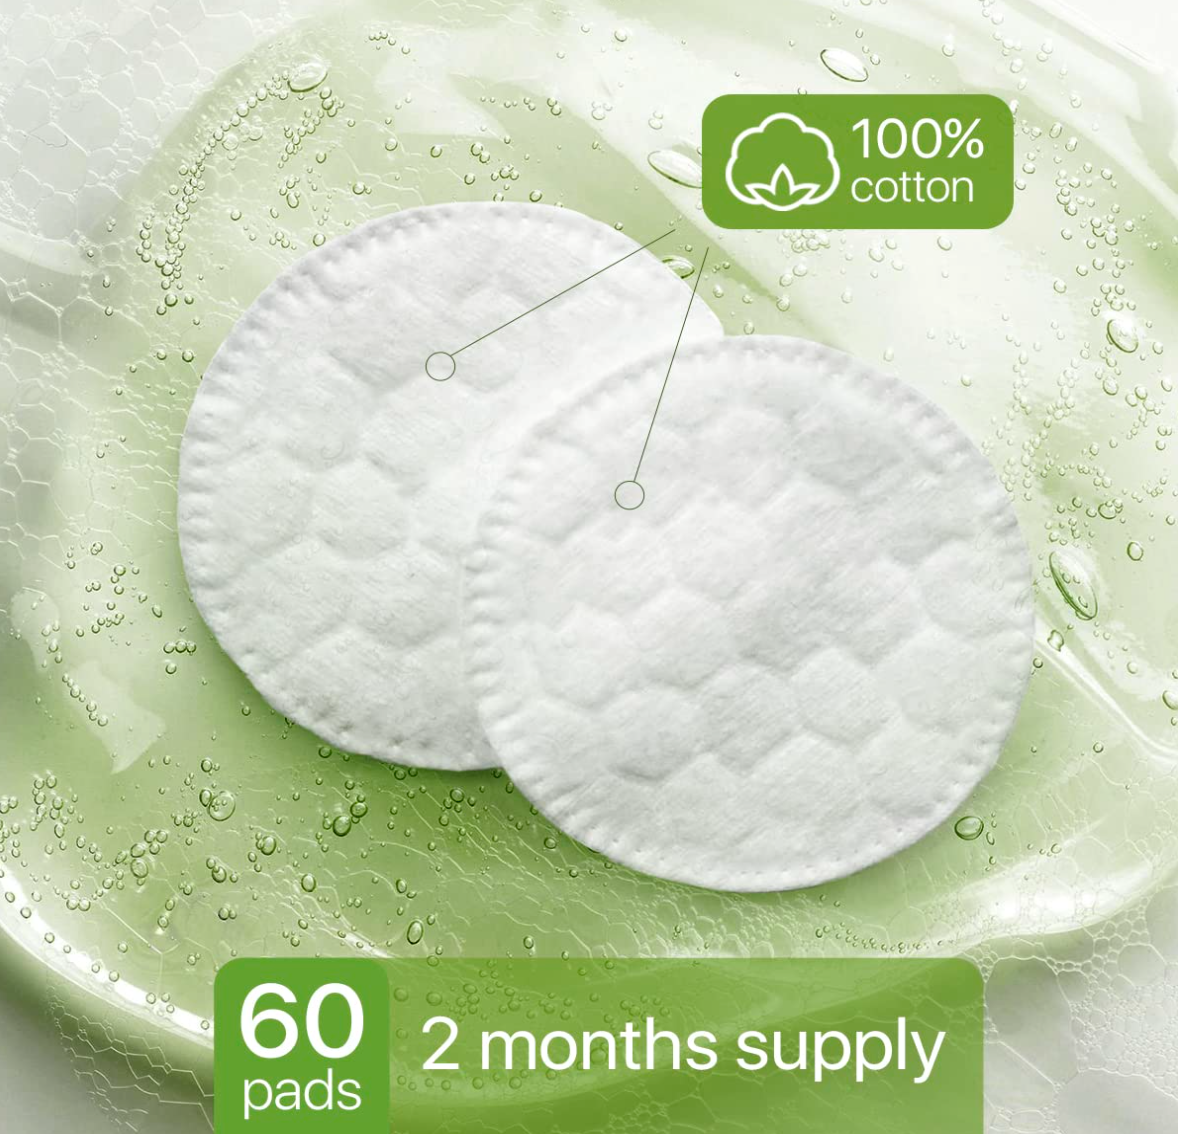 Glycolic Acid Resurfacing Pads for Face and Body - 5% Exfoliating Facial Peel - Vitamins B5 C E, Green Tea - Glycolic Acid Face Wash – 60 Pre-Moistened Cotton Pads for Face Cleansing and Peeling